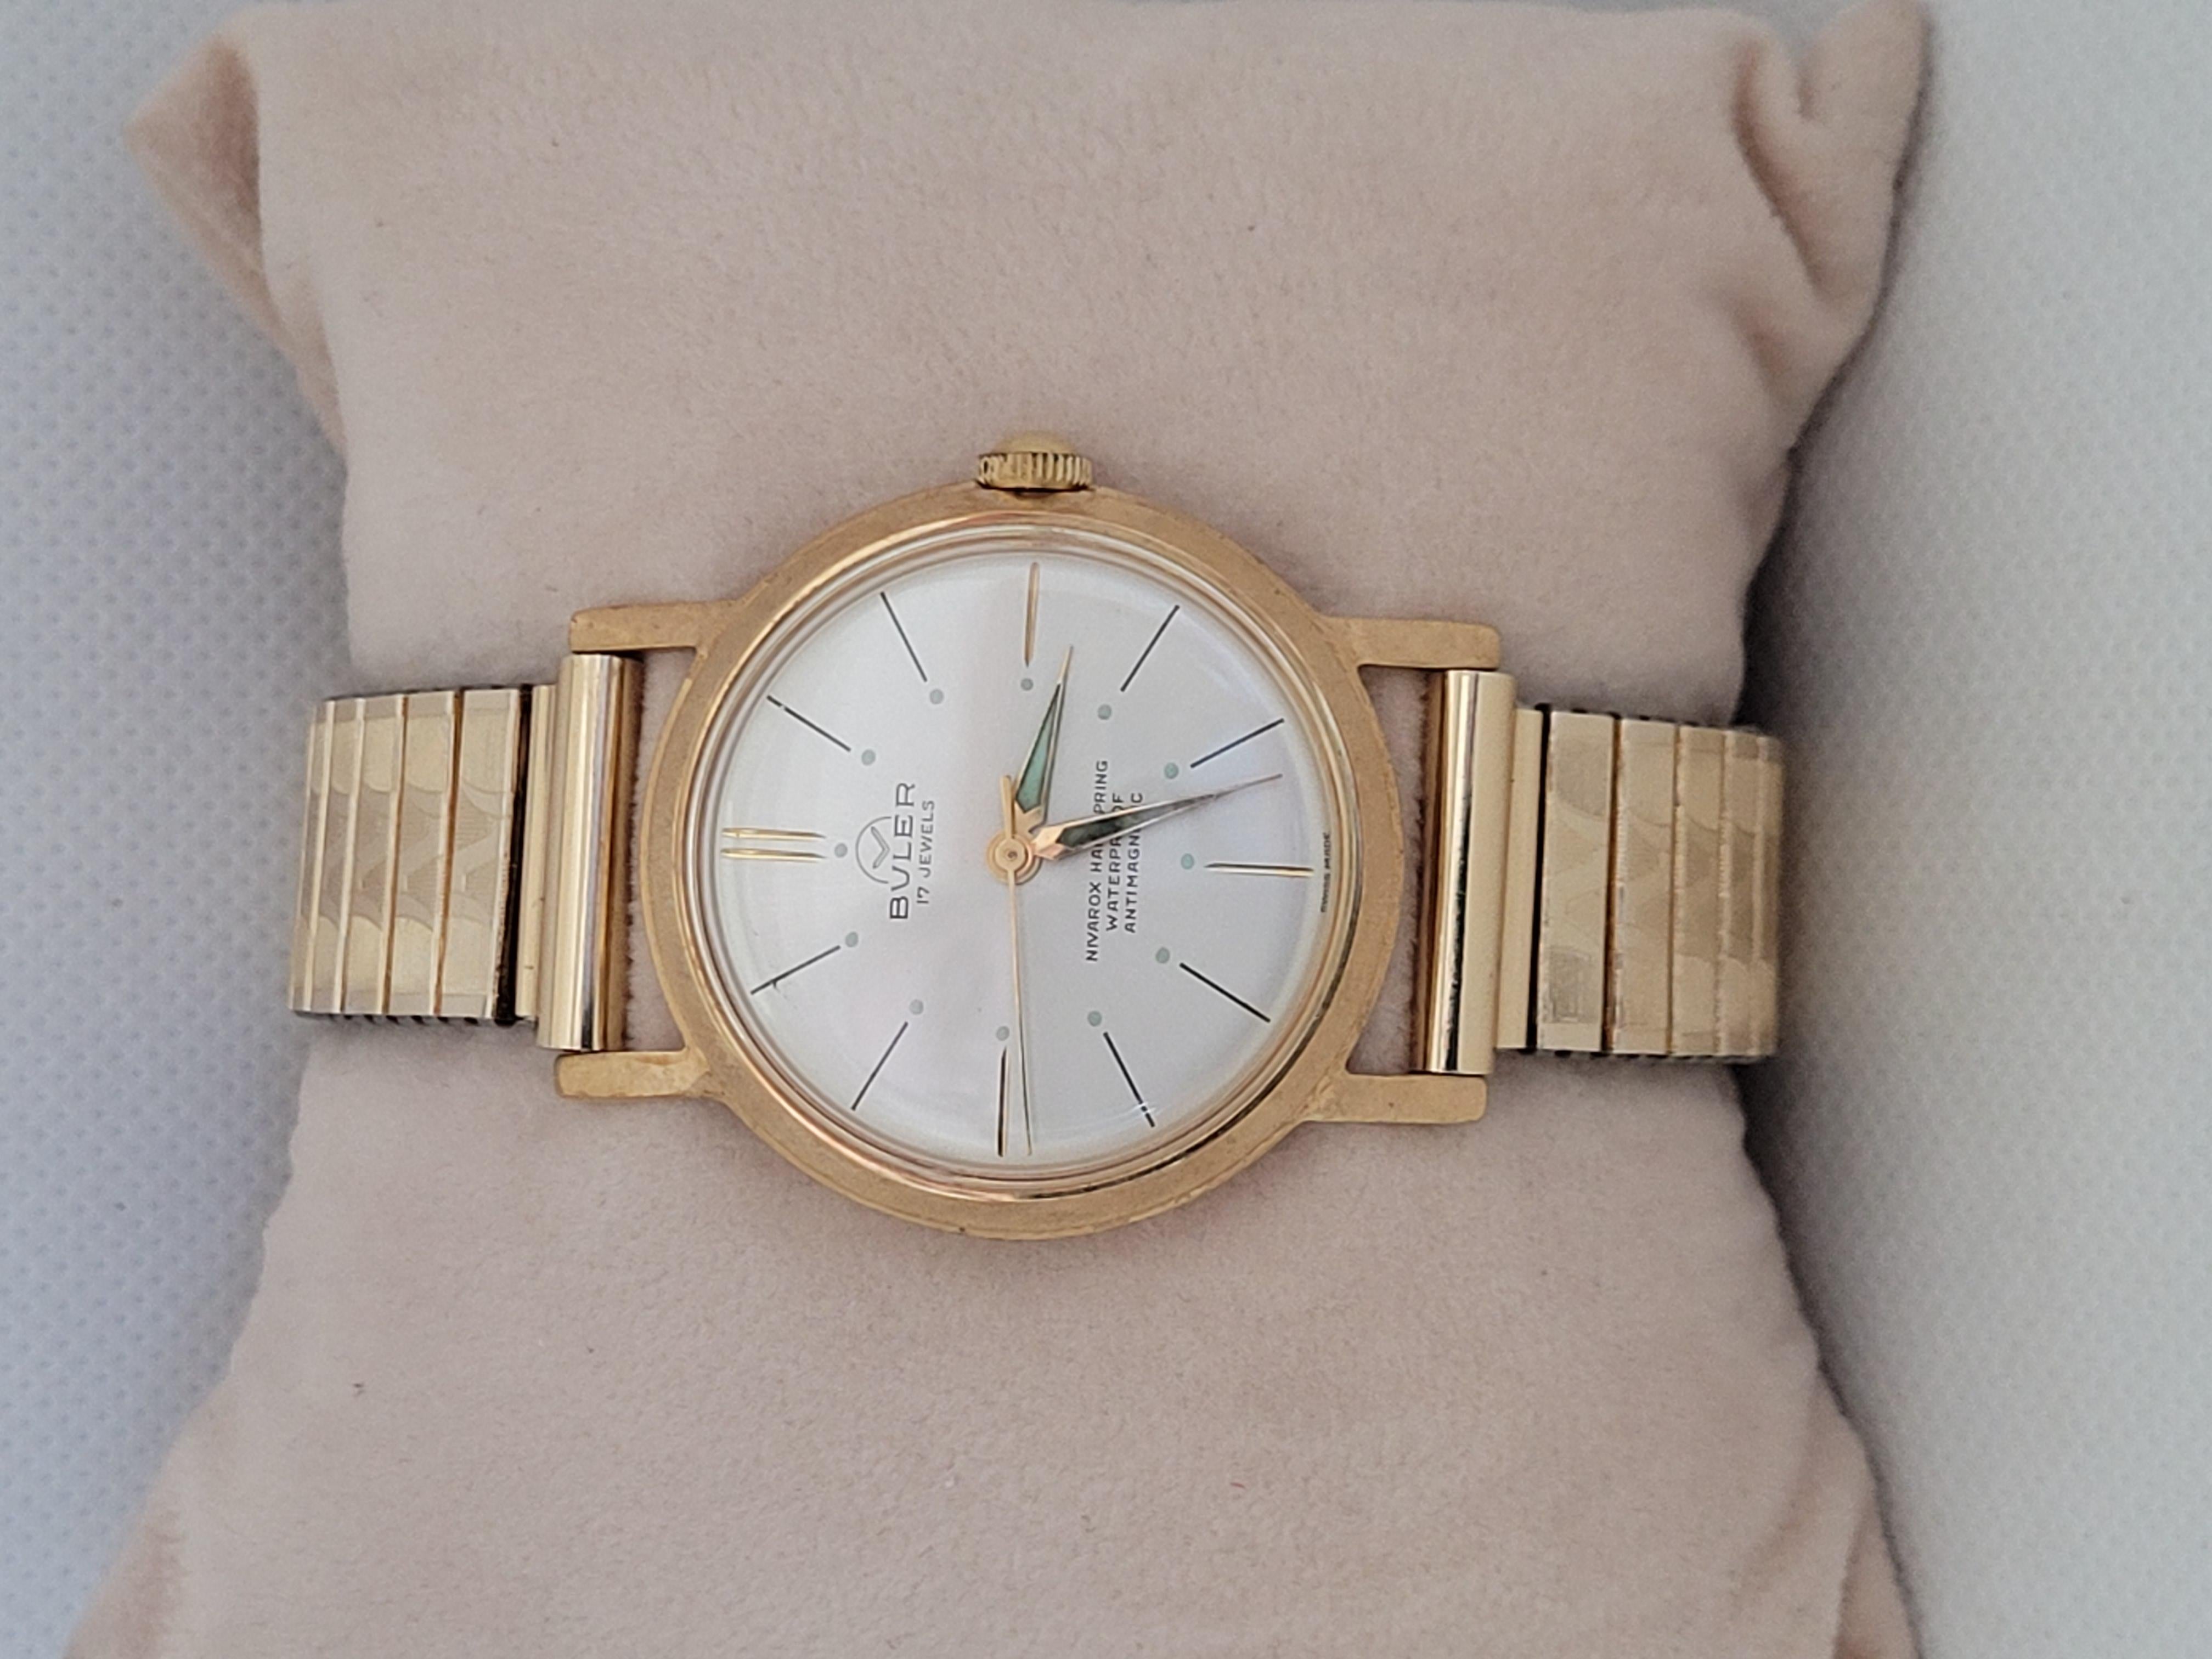 Vintage 1950s 34mm Buler mens watch in very good condition and working. The case is 9mm thick and marked on the back model #1197, antimagnetic, and Swiss-made. The movement is 17 jewels.  This watch is in beautiful condition and comes with original